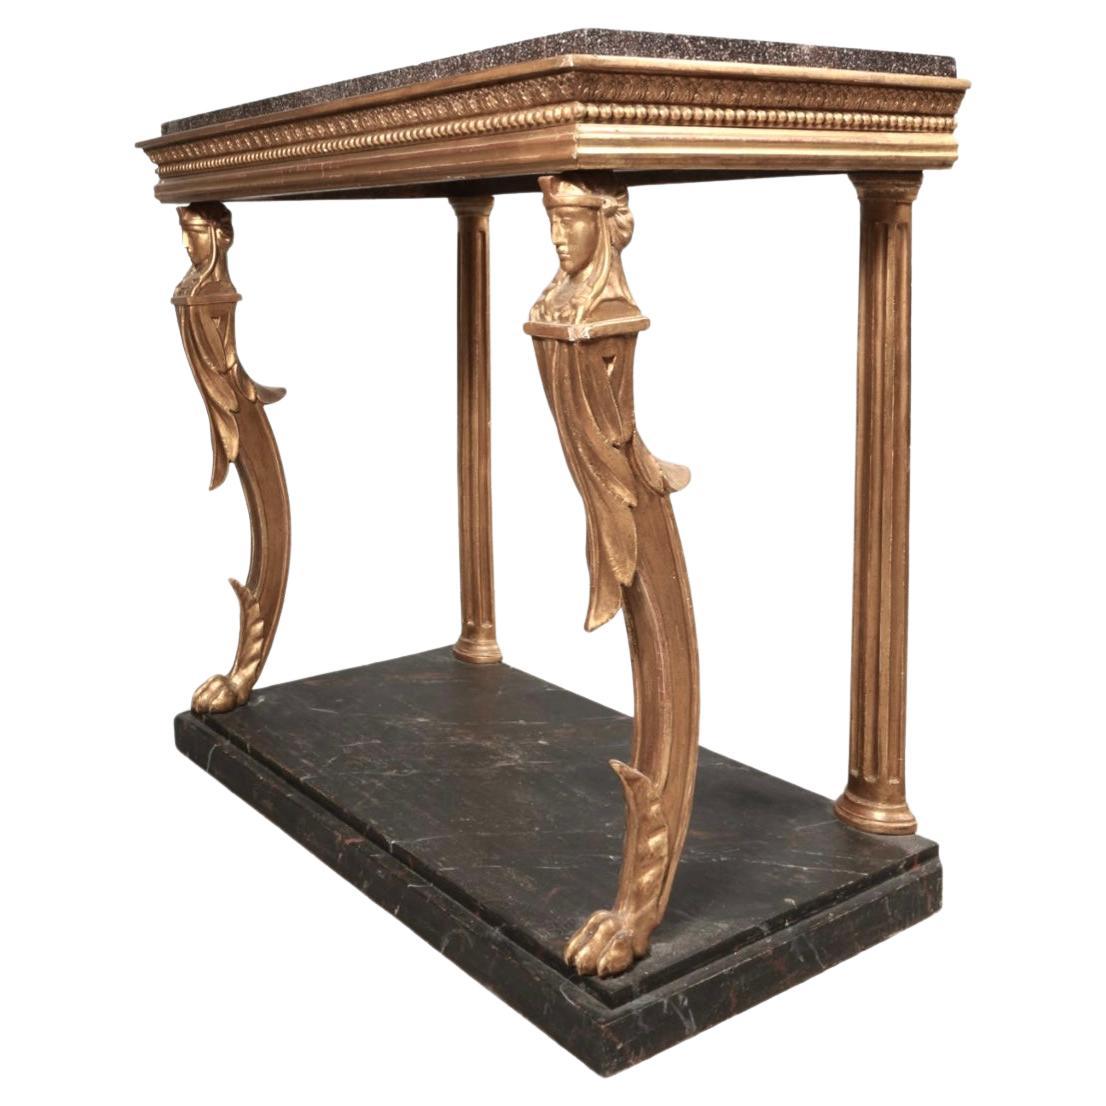 Swedish Neoclassical Giltwood Porphyry Top Console Table, Early 19th Century For Sale 1